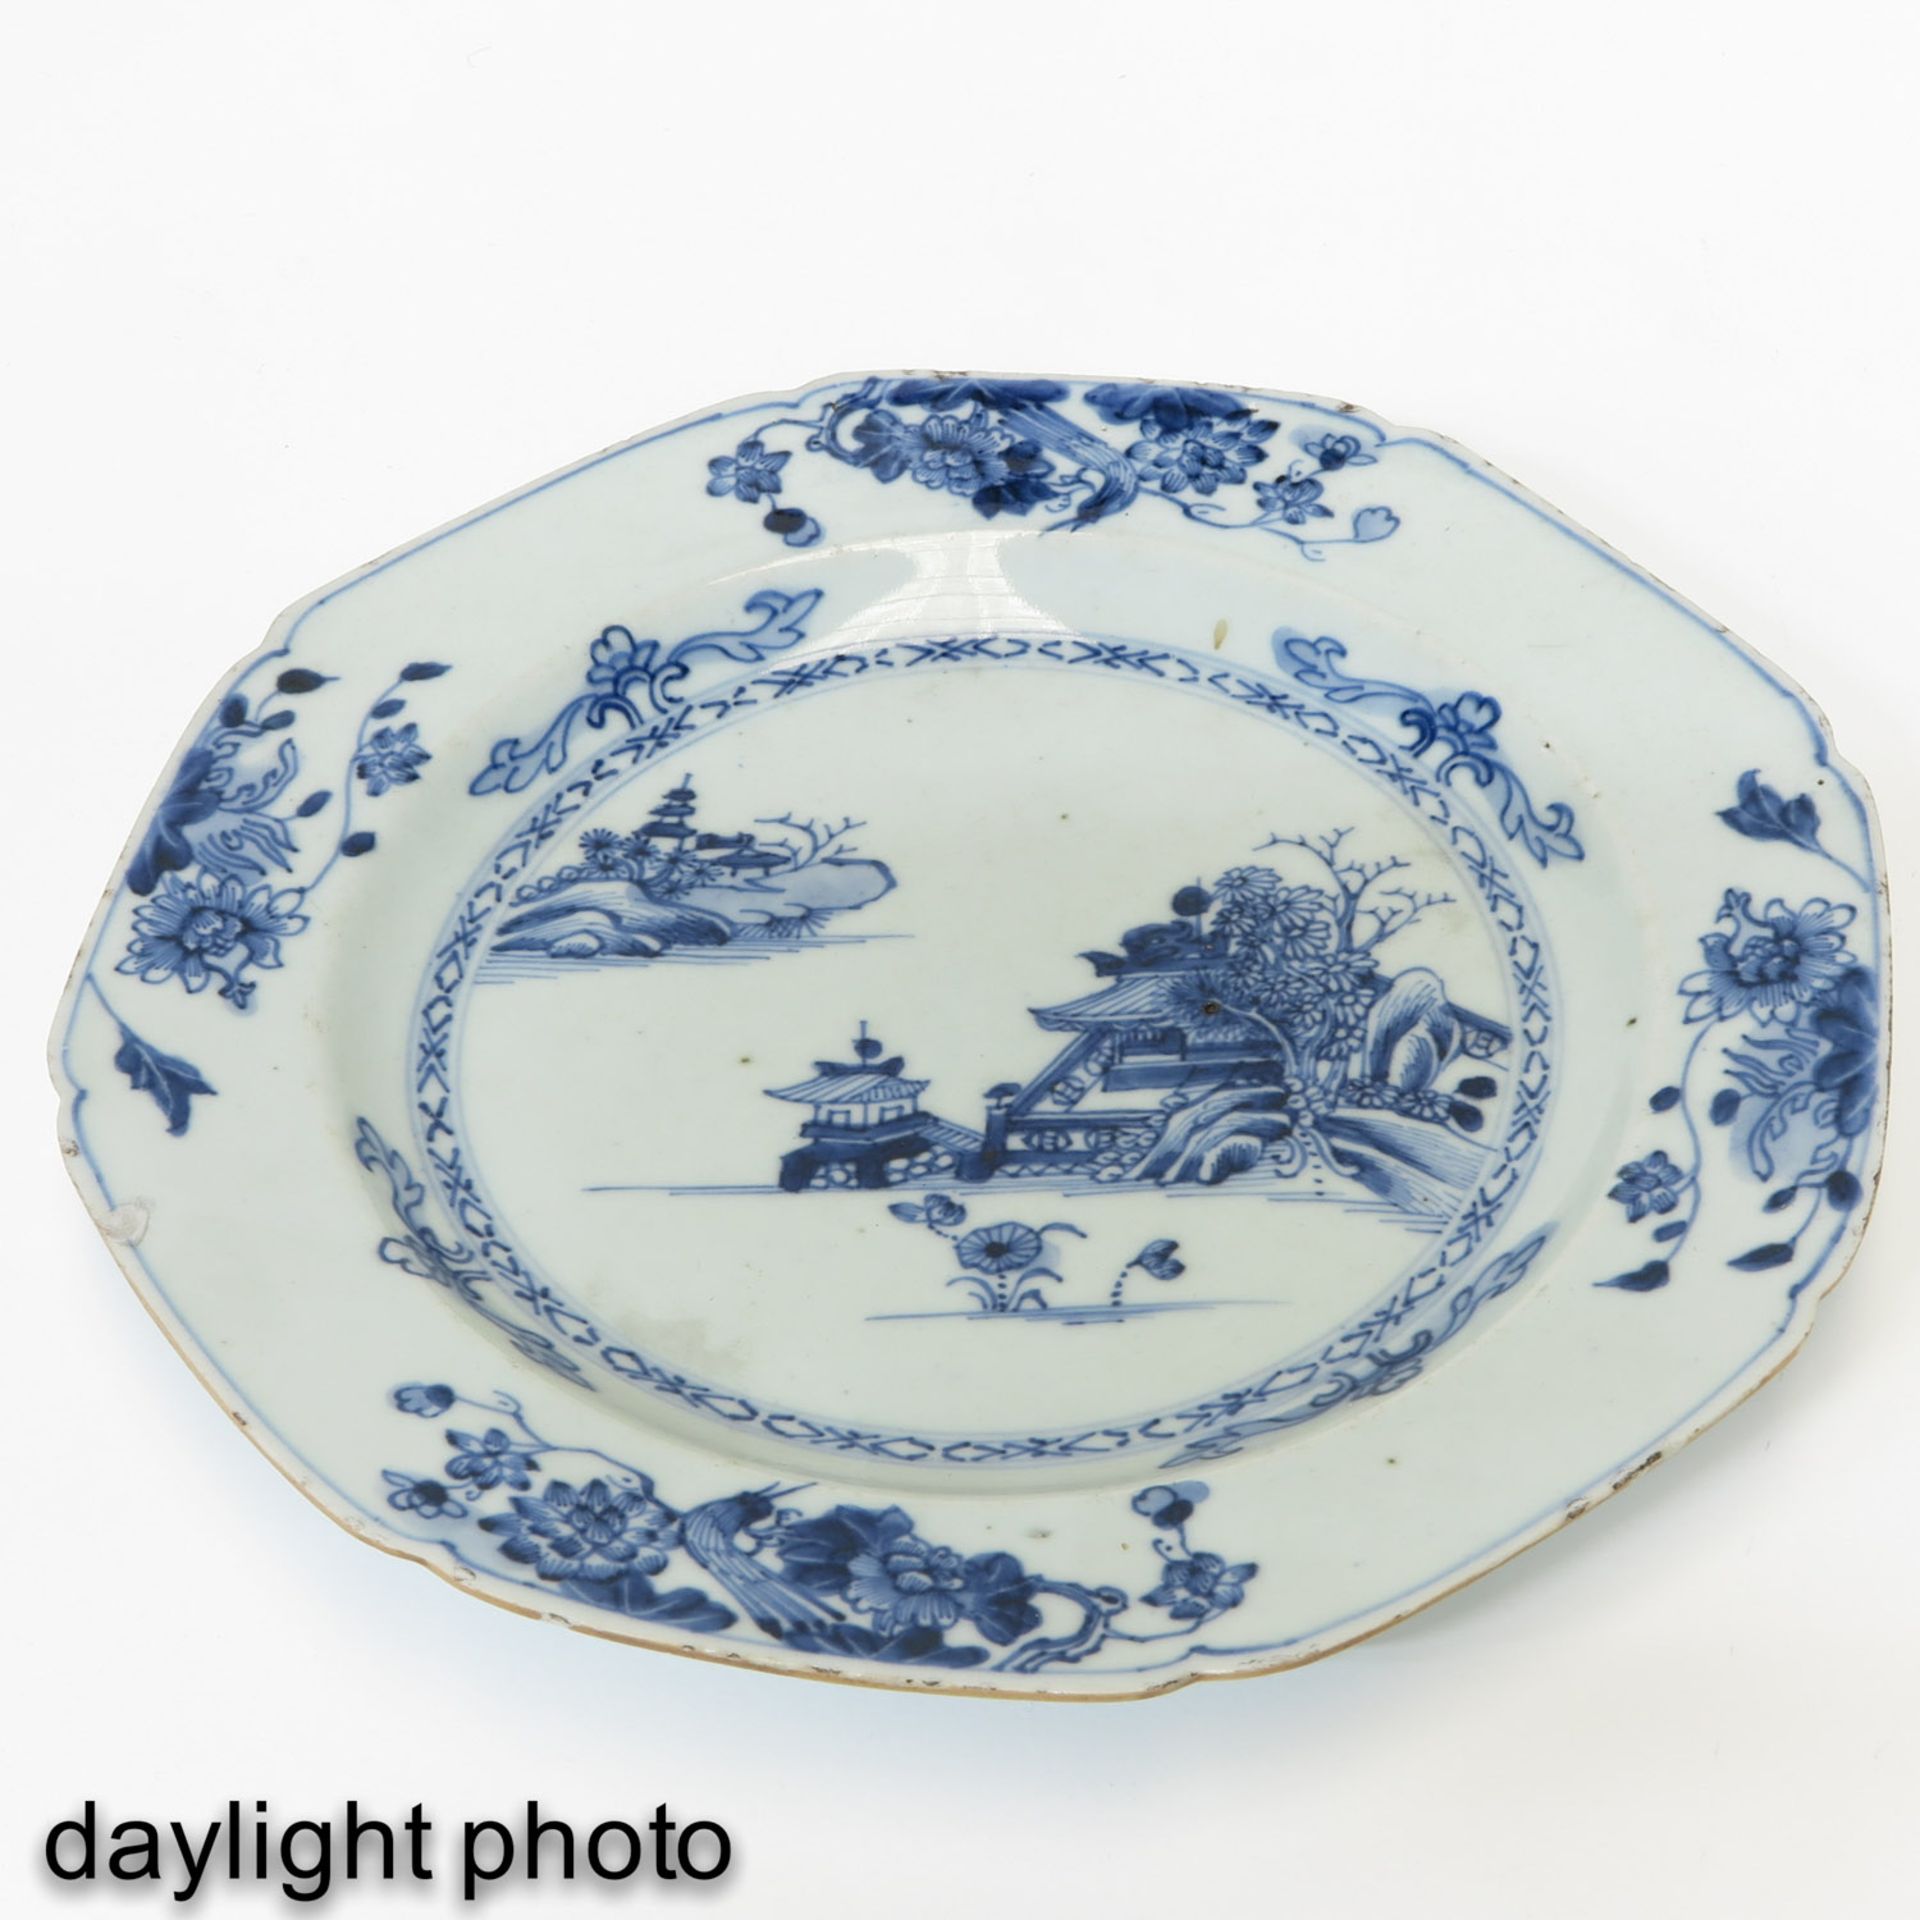 A Series of 4 Blue and White Plates - Image 7 of 10